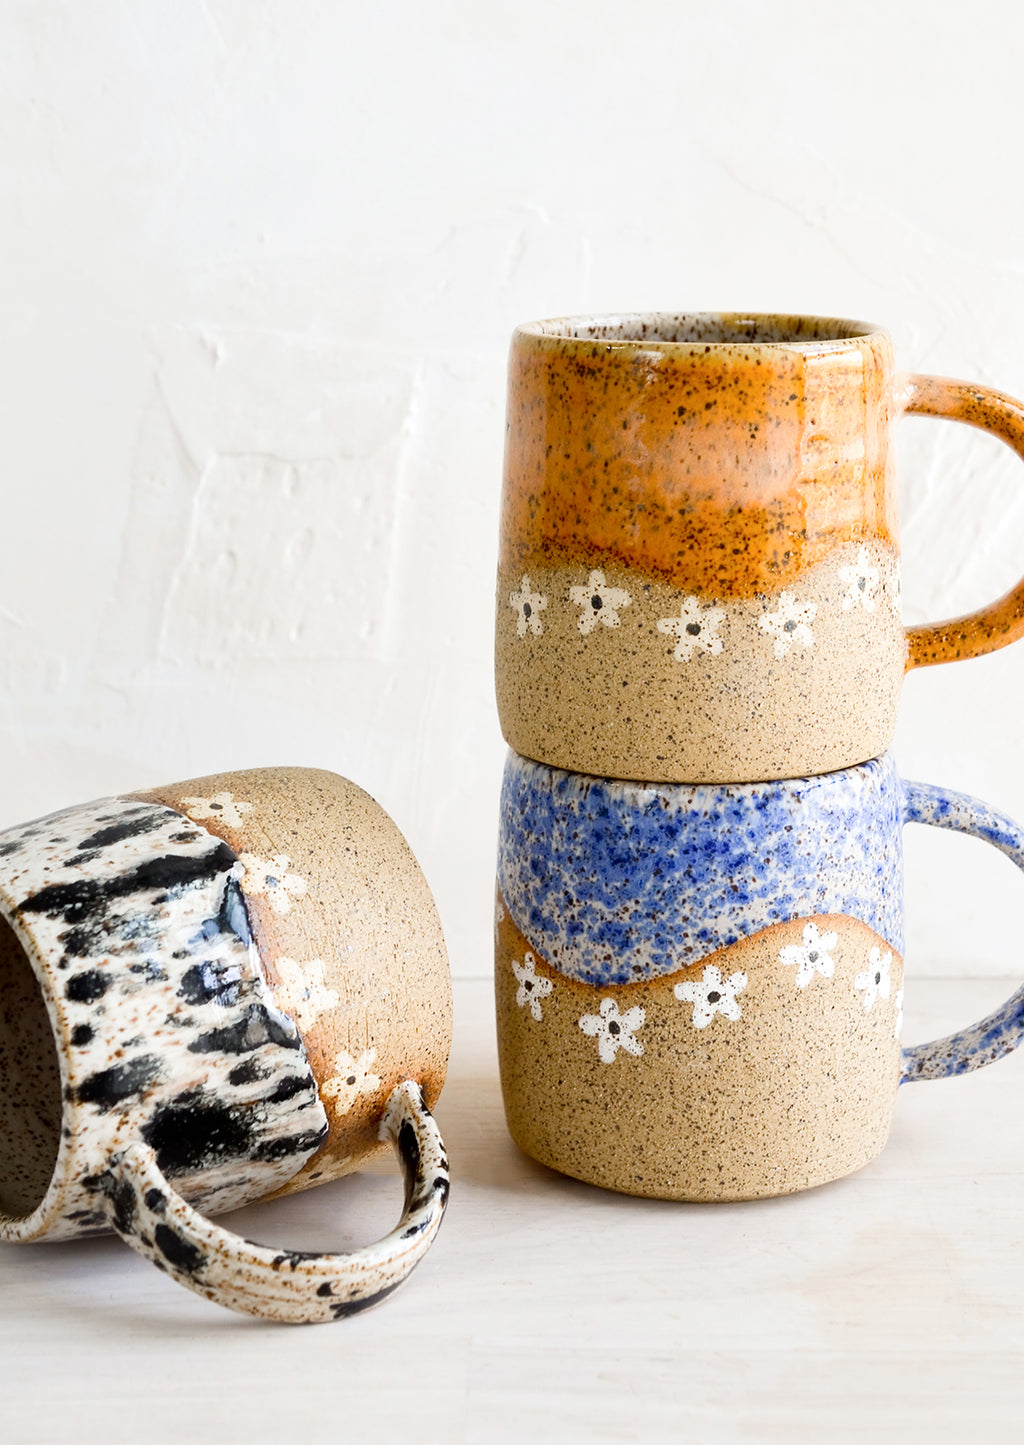 2: A stack of speckled ceramic coffee mugs with wavy daisy design.